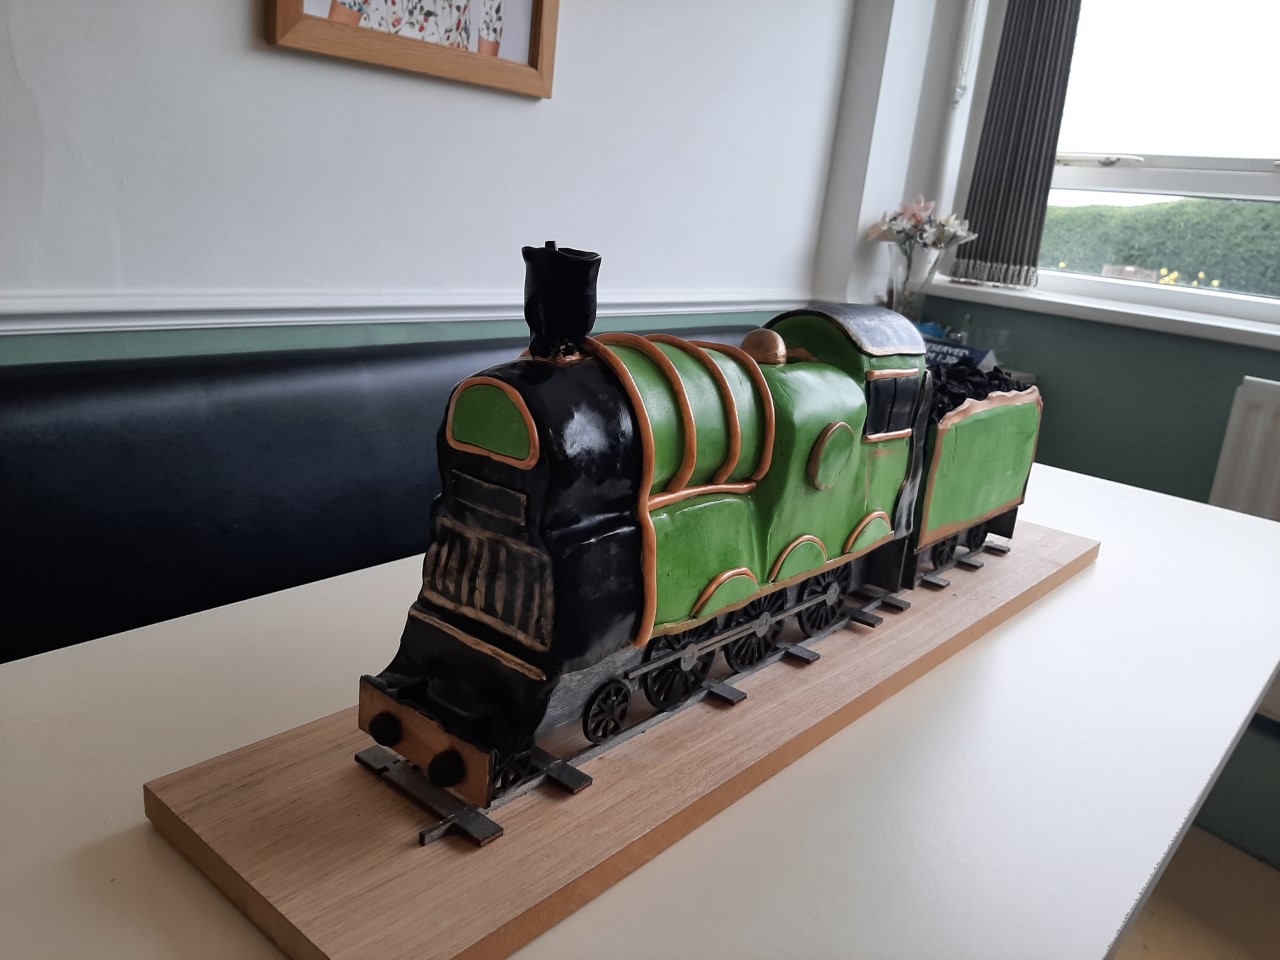 David Nieper raised hundreds of pounds for Midland Railway - Butterley after it was vandalised in January 2023. Cake made by Julie Bailey, owner of Just Add Candles